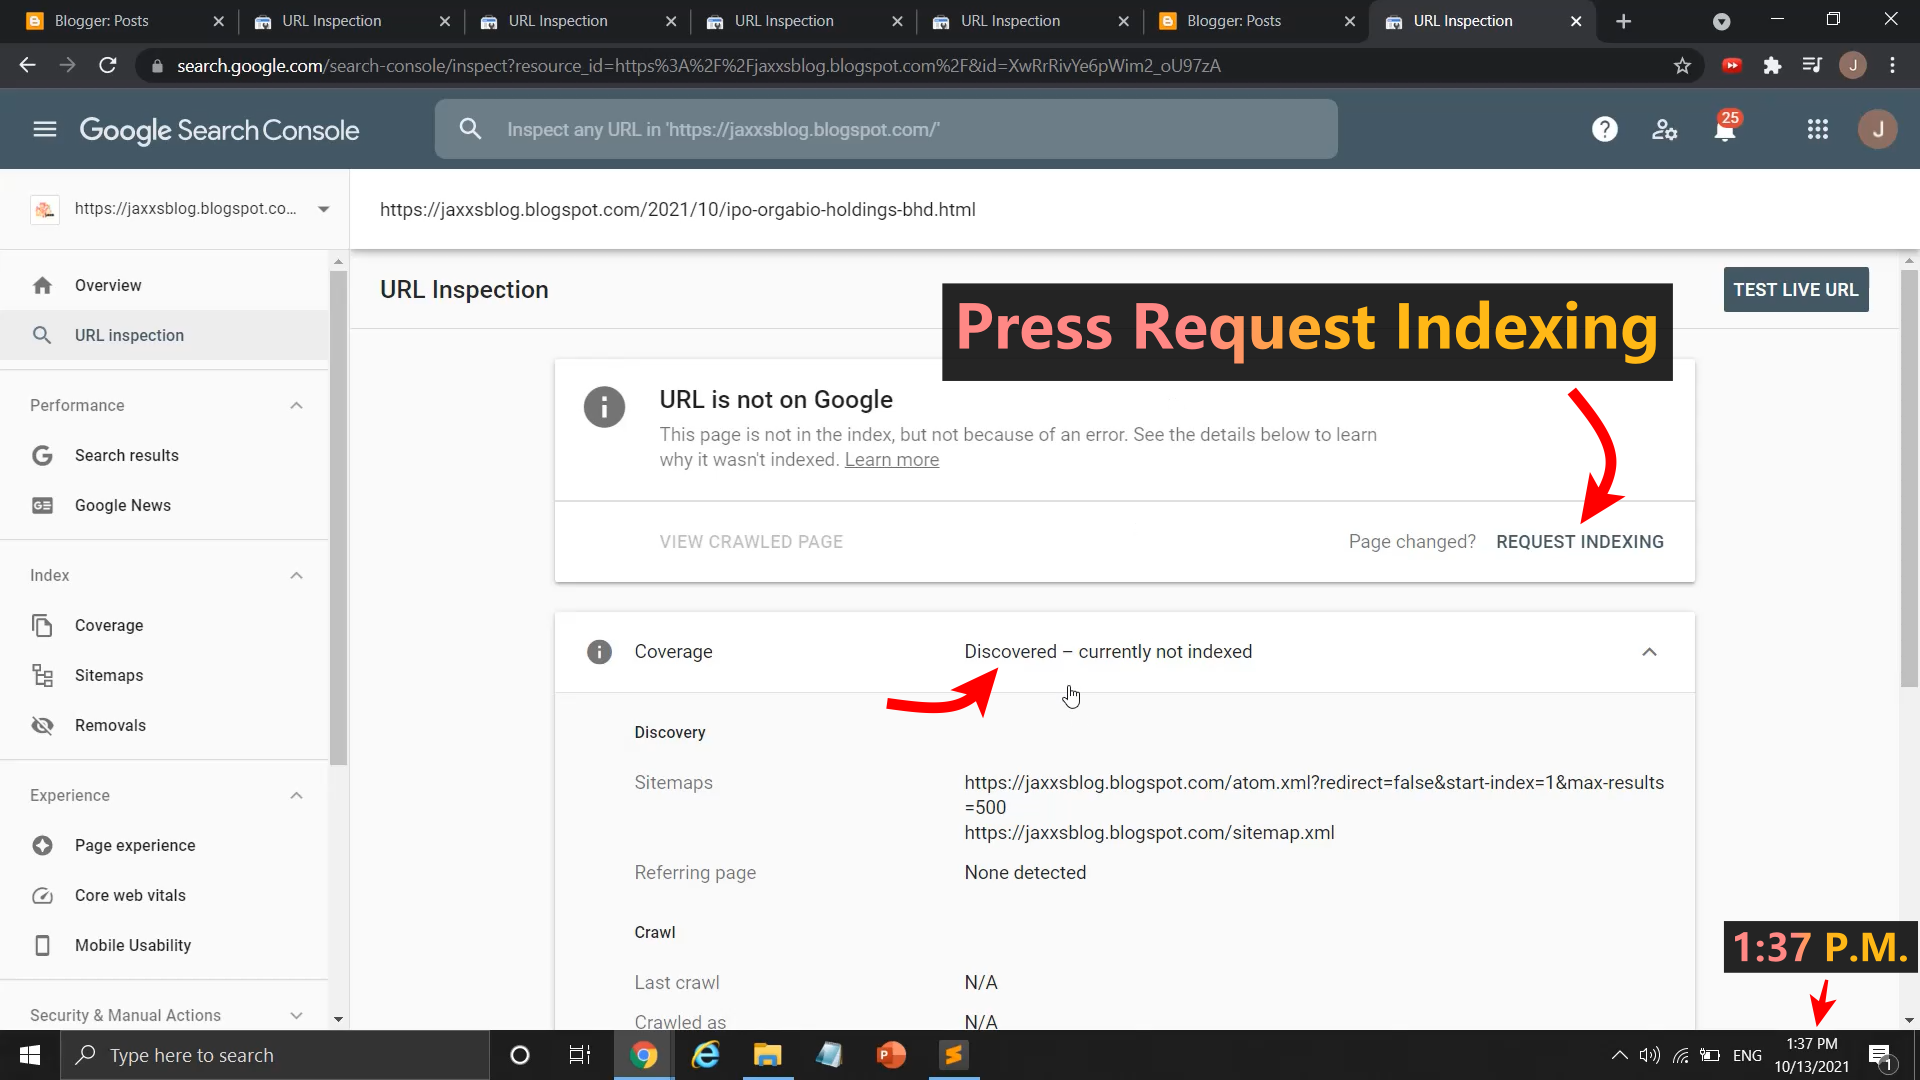 How to request indexing in Google Search Console - Let Google crawl and index my posts